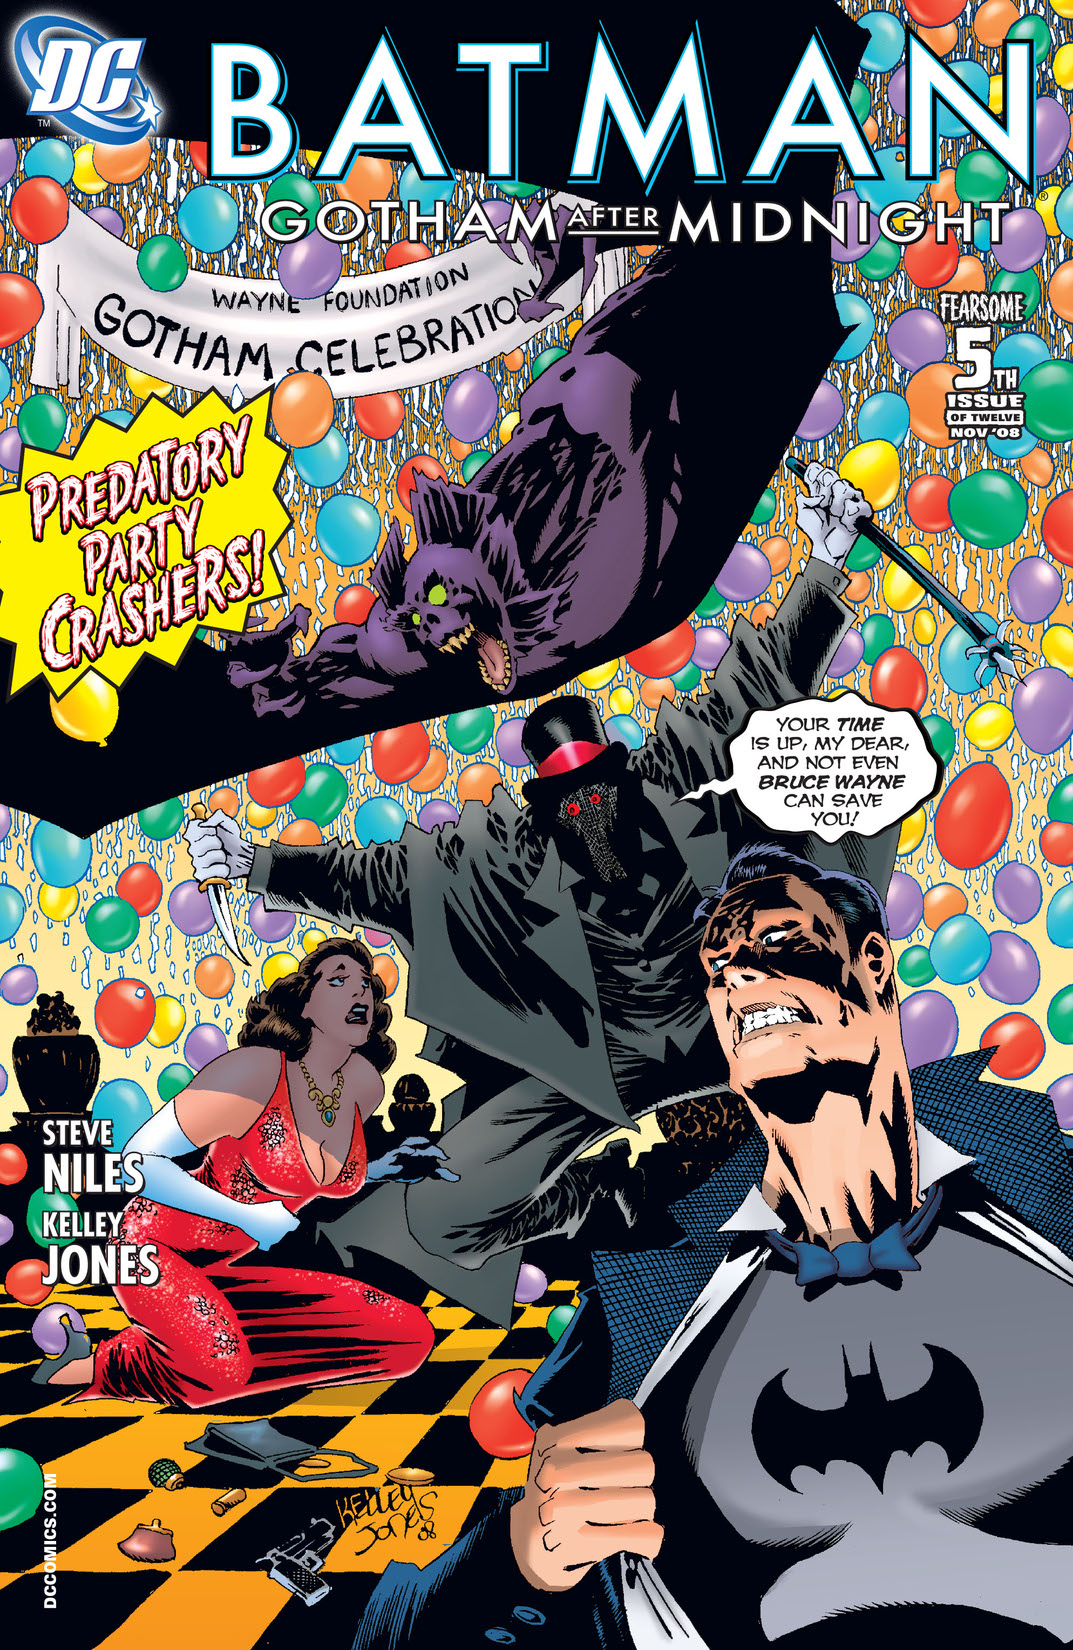 Batman: Gotham After Midnight #5 preview images